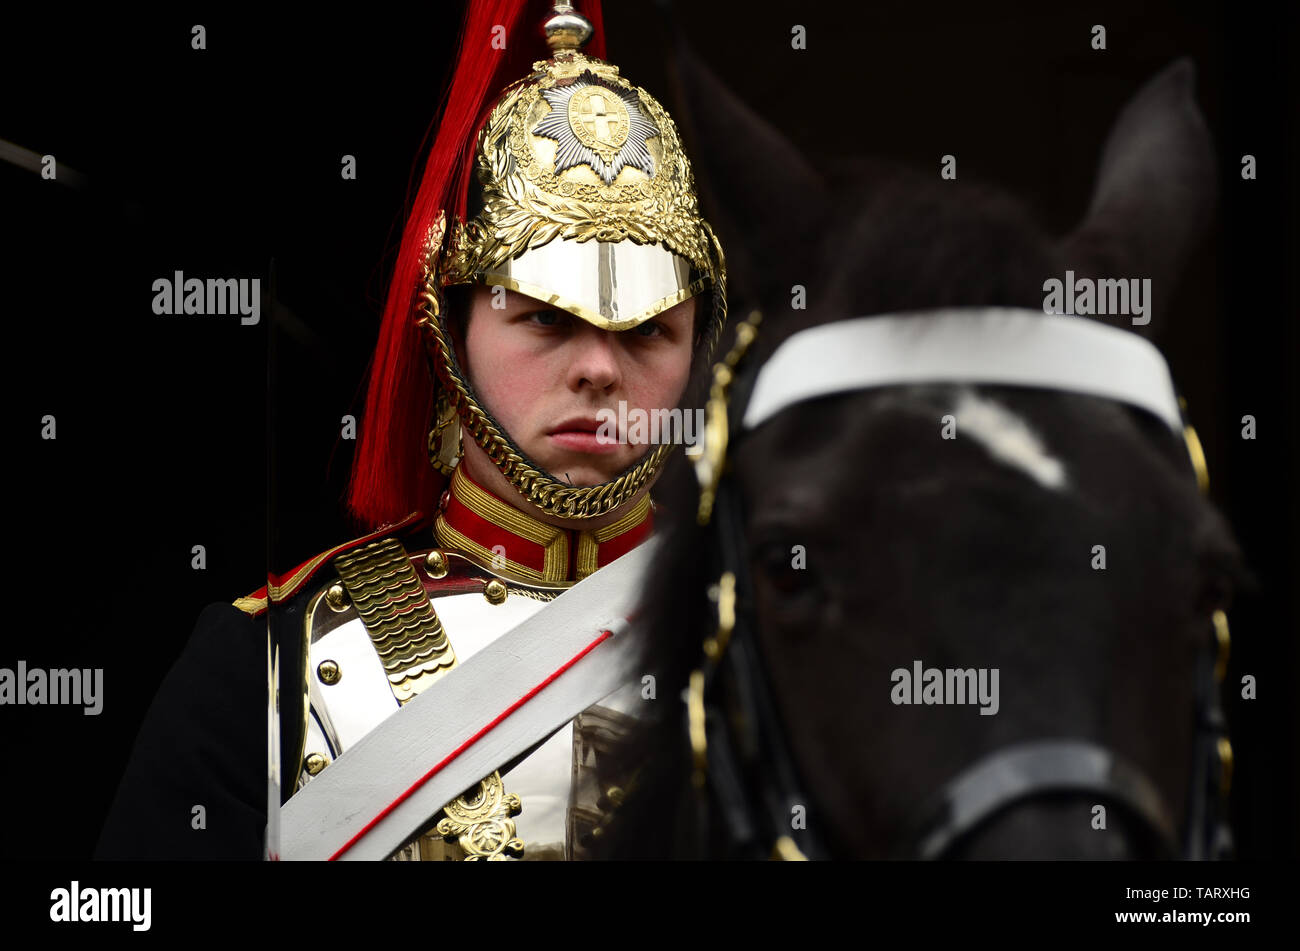 Londres - le 31 mars 2012 : Close-up of a Royal Horse Guard in front of house Hold Cavalry London UK Banque D'Images